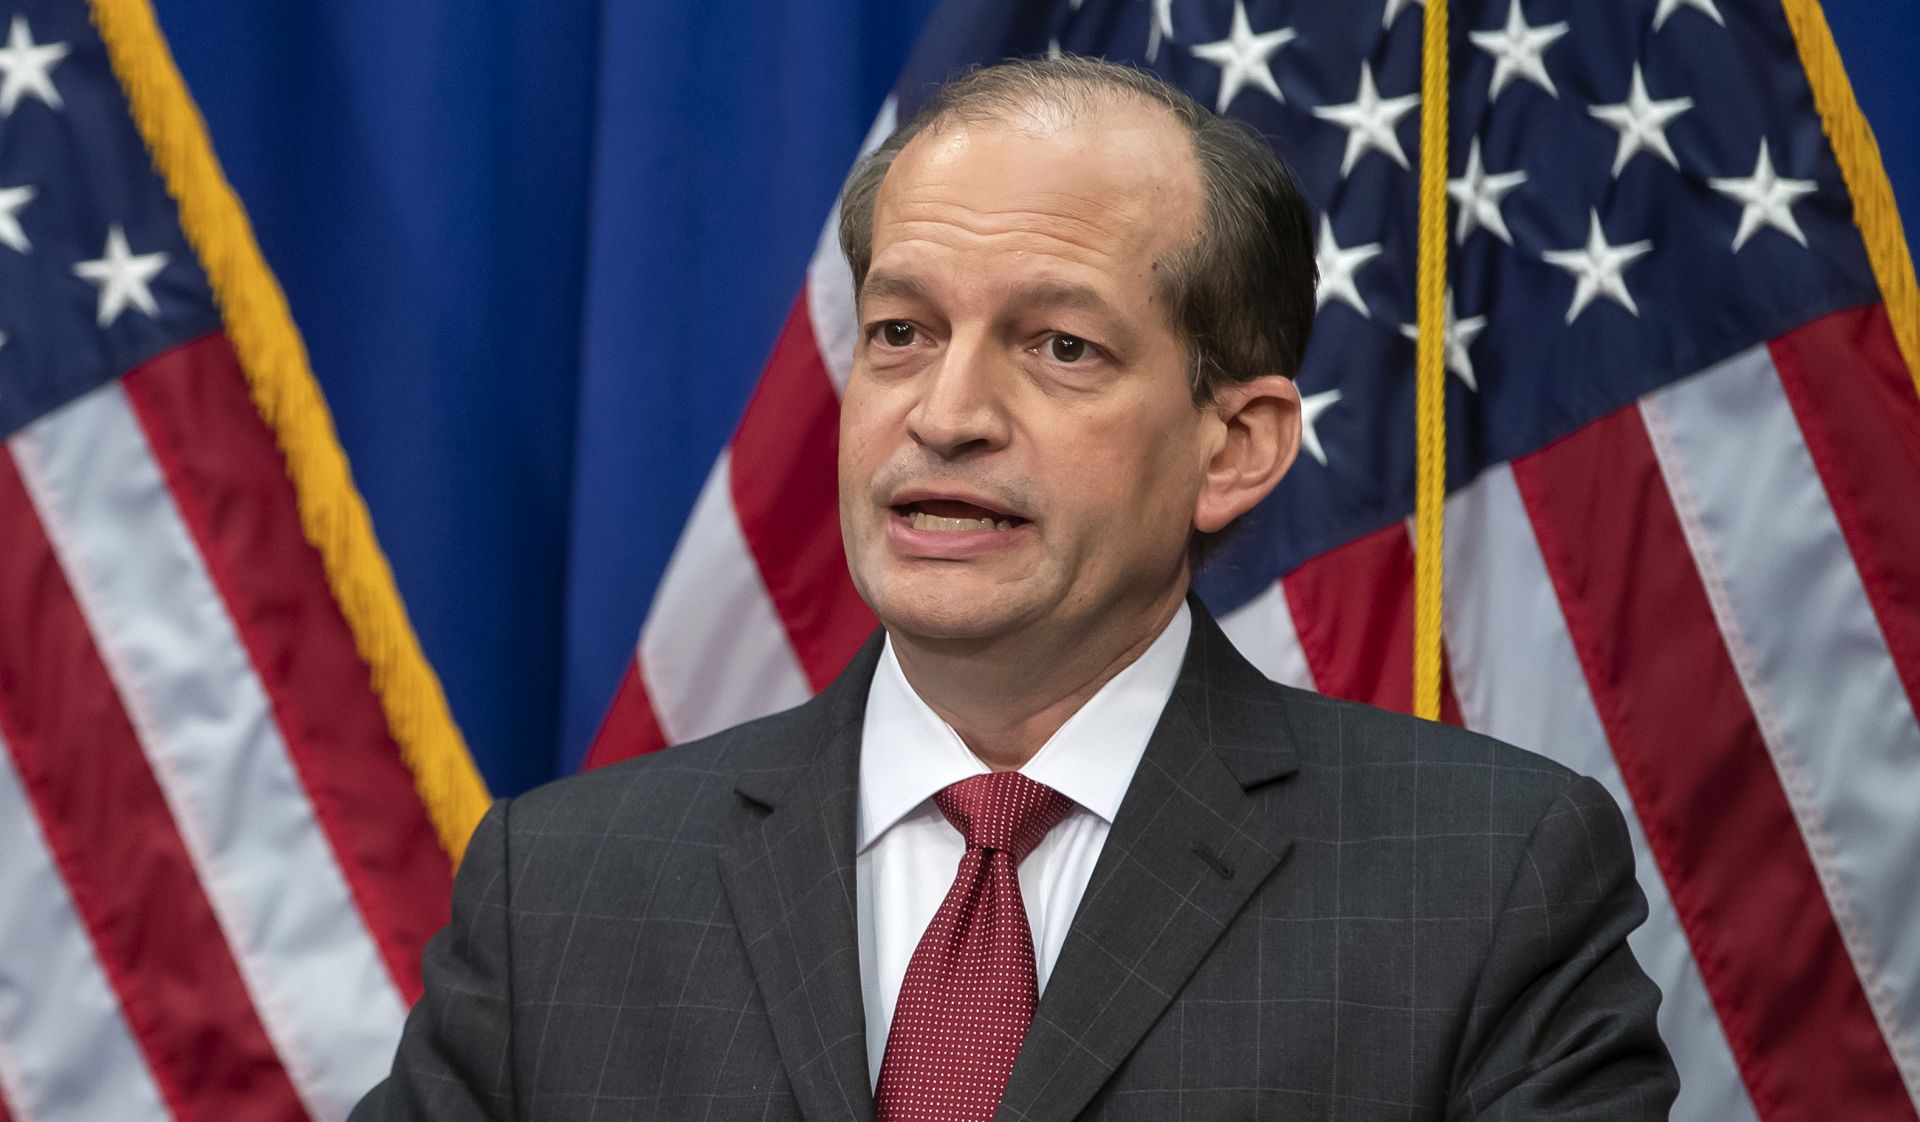 epa07708634 US Secretary of Labor Alex Acosta speaks at a news conference at the Department of Labor in Washington, DC, USA, 10 July 2019. Acosta has come under fire for his role in a plea deal for Jeffrey Epstein in 2008. Epstein was recently arrested and charged with sex trafficking of minors.  EPA/ERIK S. LESSER